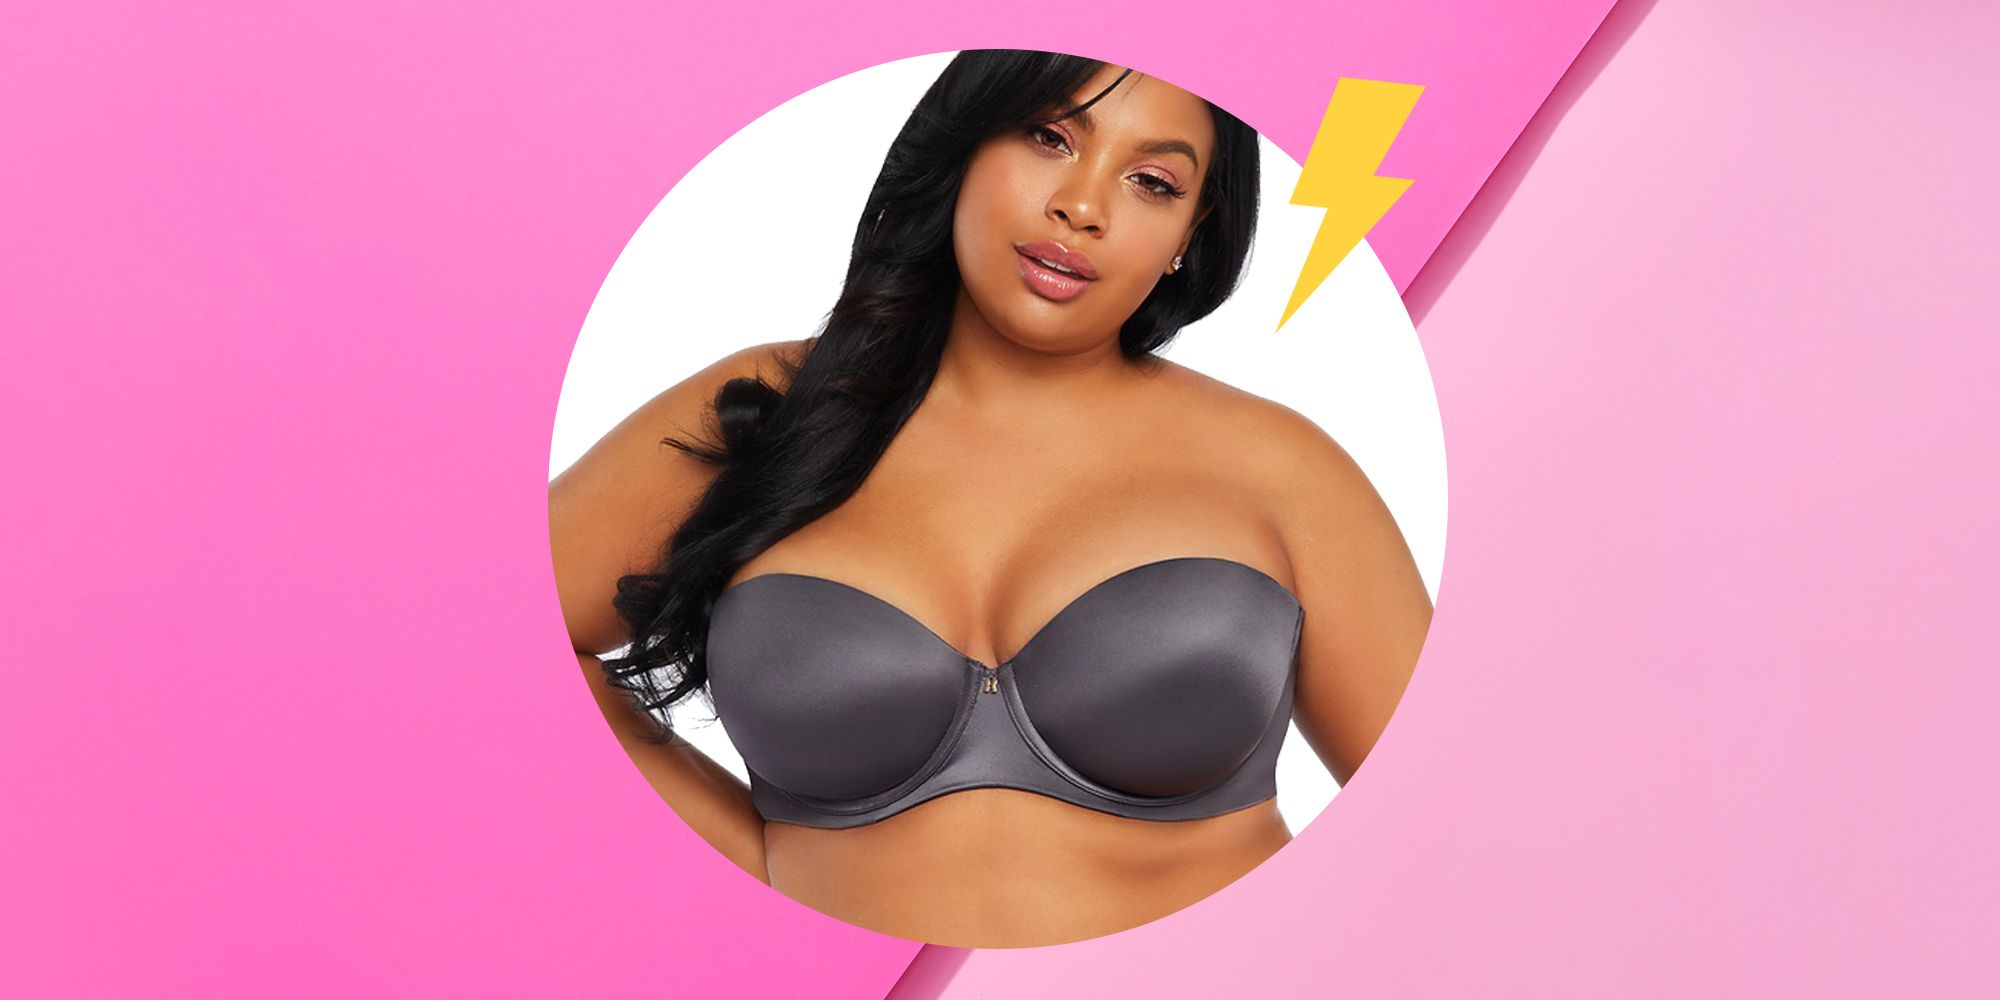 Push-Up Bras 36G, Bras for Large Breasts